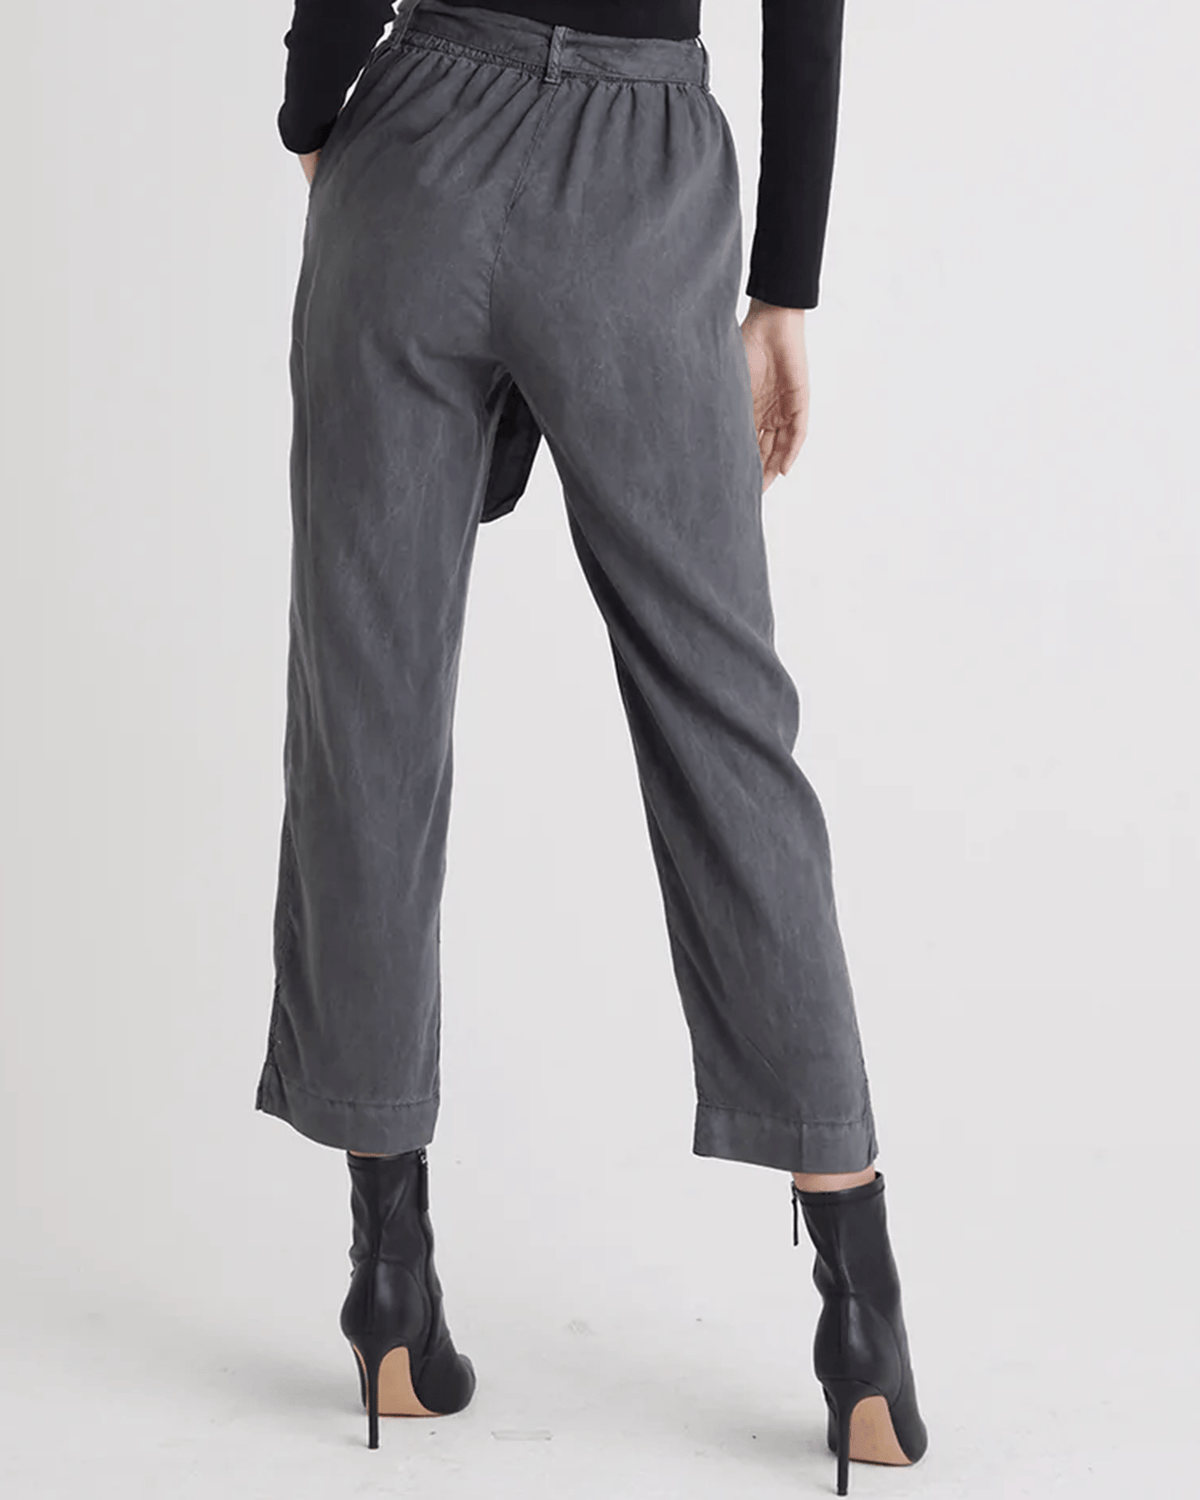 Bella Dahl Clothing Belted Patch Pocket Trouser in Smoke Stack